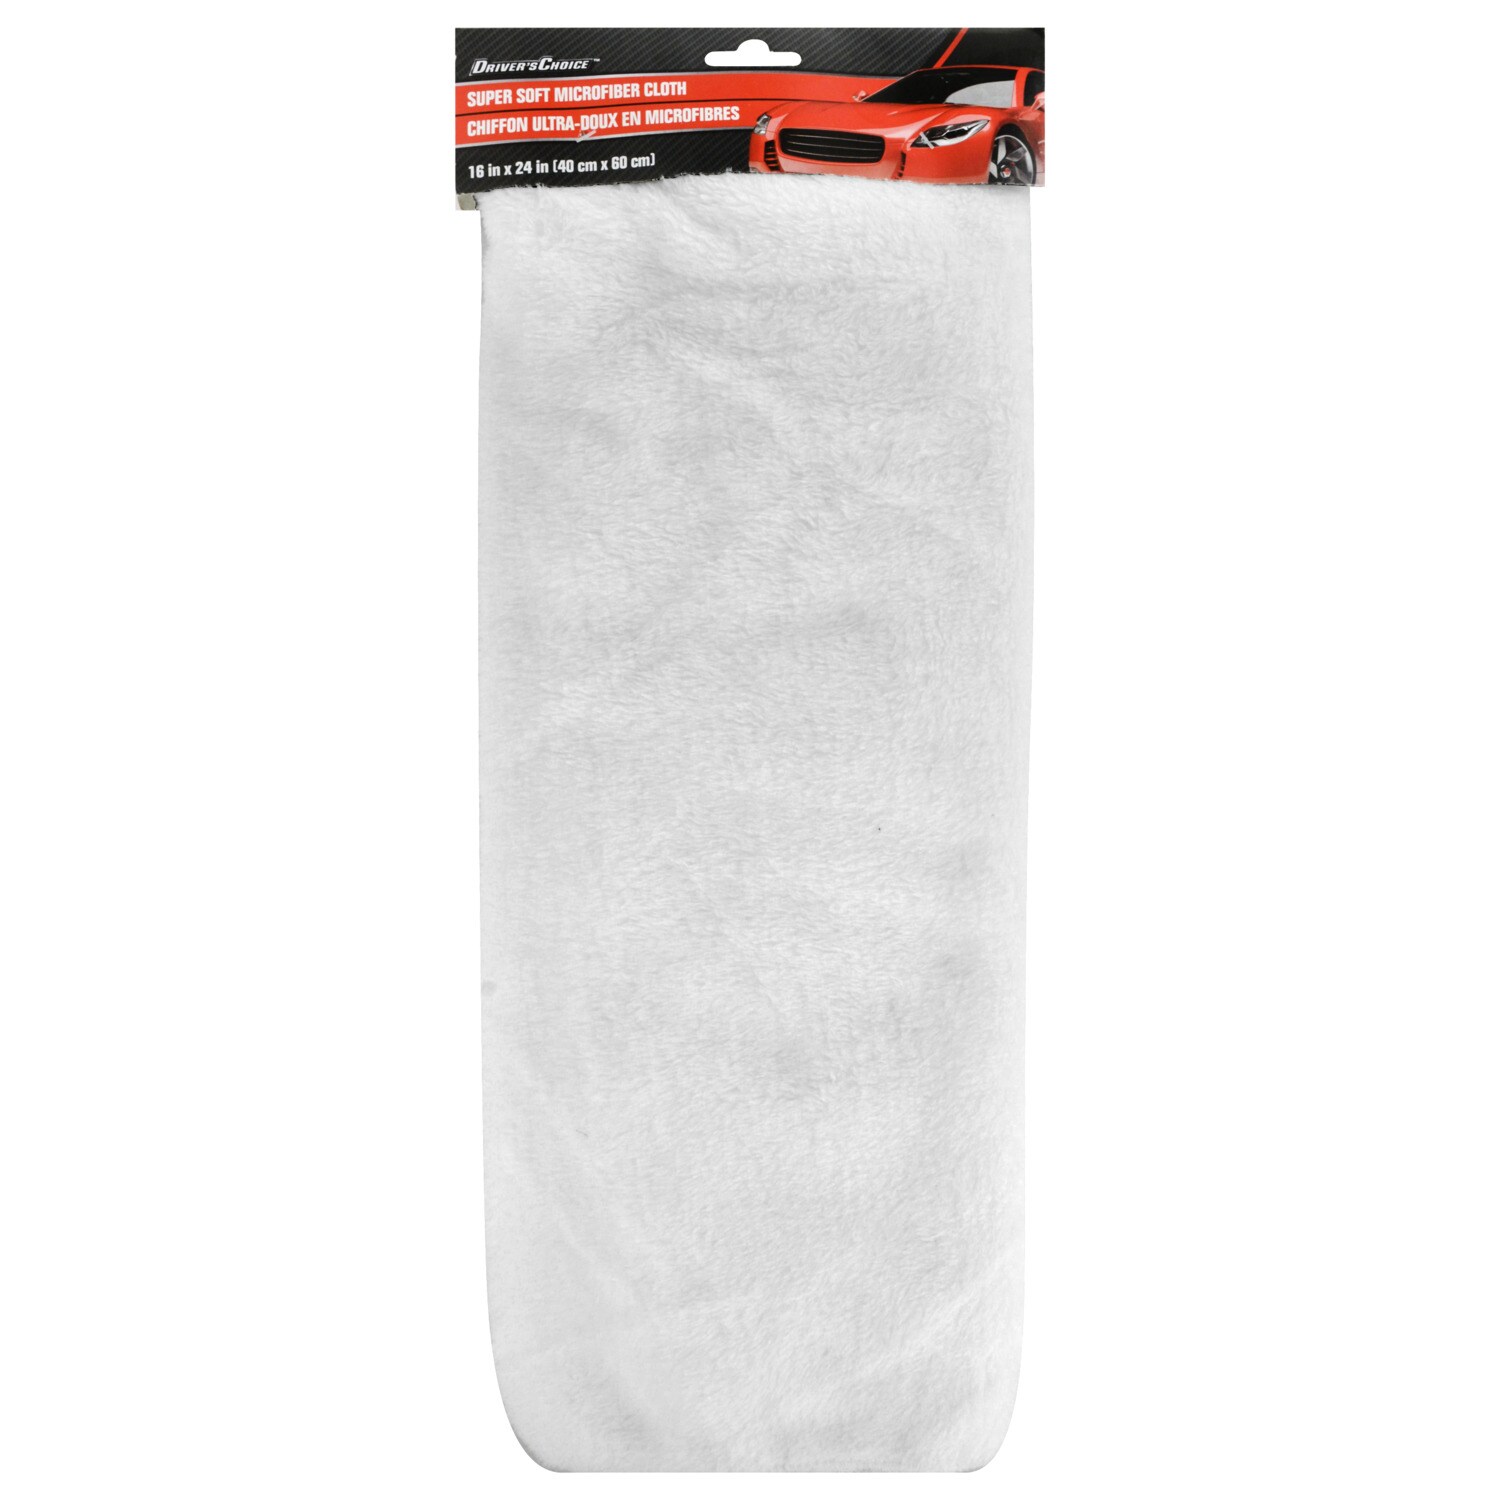 Drivers Choice White Microfiber Towel Car Cleaning Super Soft 